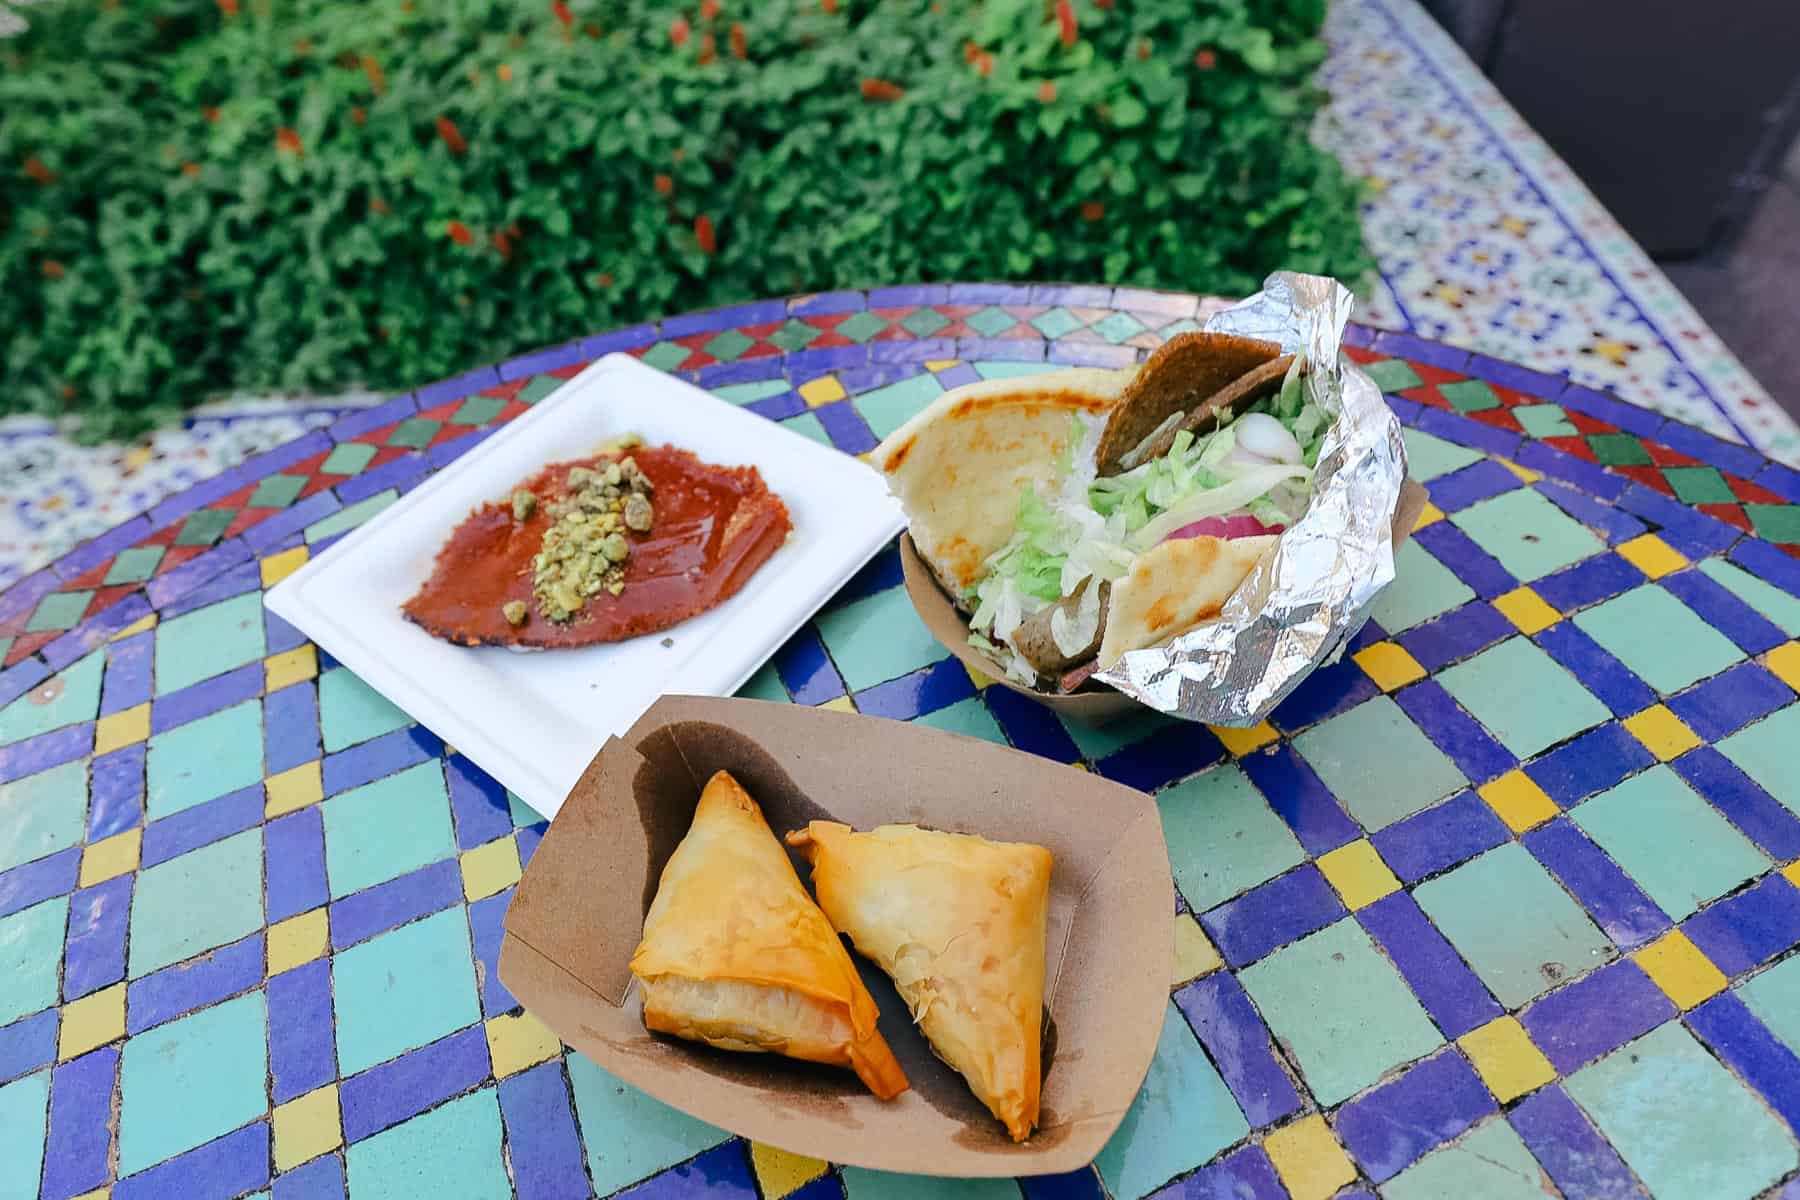 Greece Marketplace Review at Epcot Food and Wine